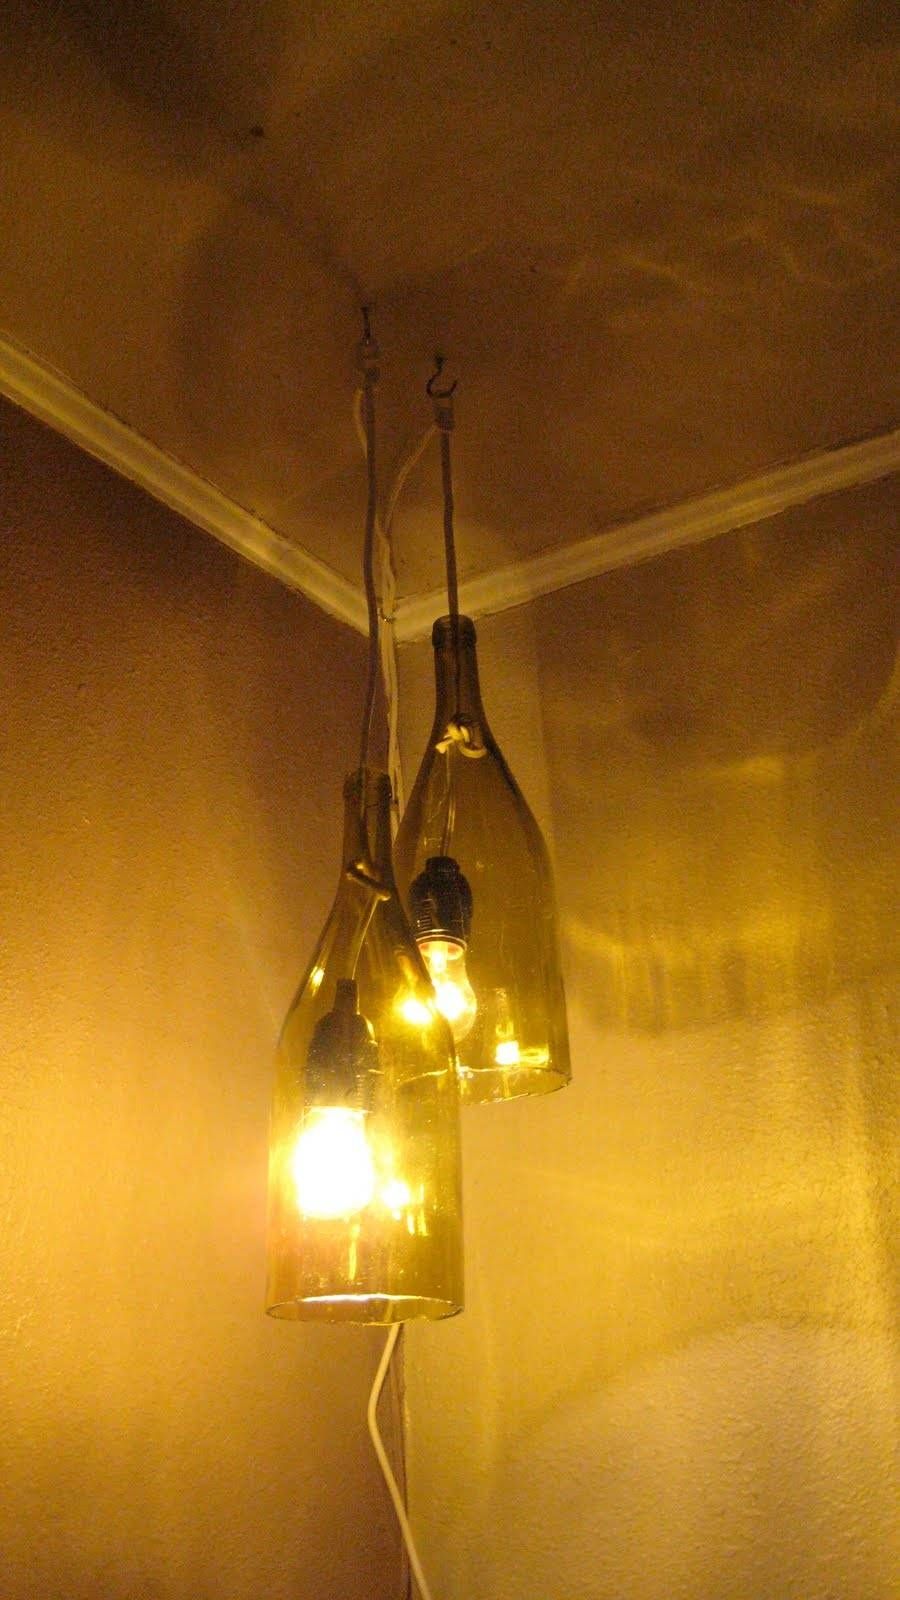 Remodelaholic | How To Make A Glass Wine Bottle Pendant Light Diy Pertaining To Bottle Pendant Lights (View 10 of 15)